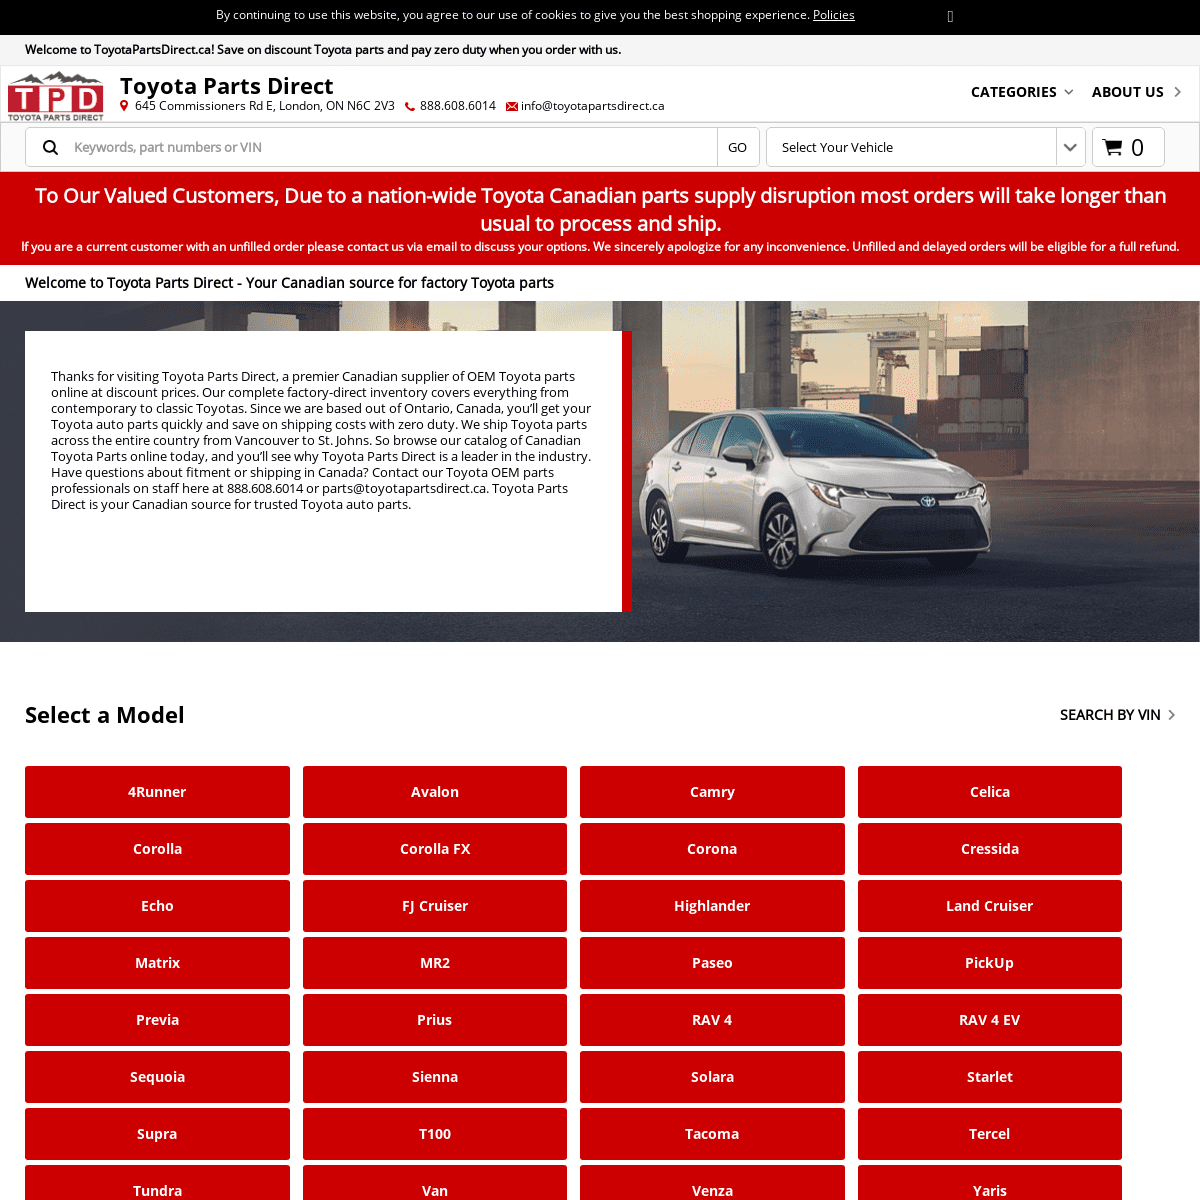 A complete backup of toyotapartsdirect.ca